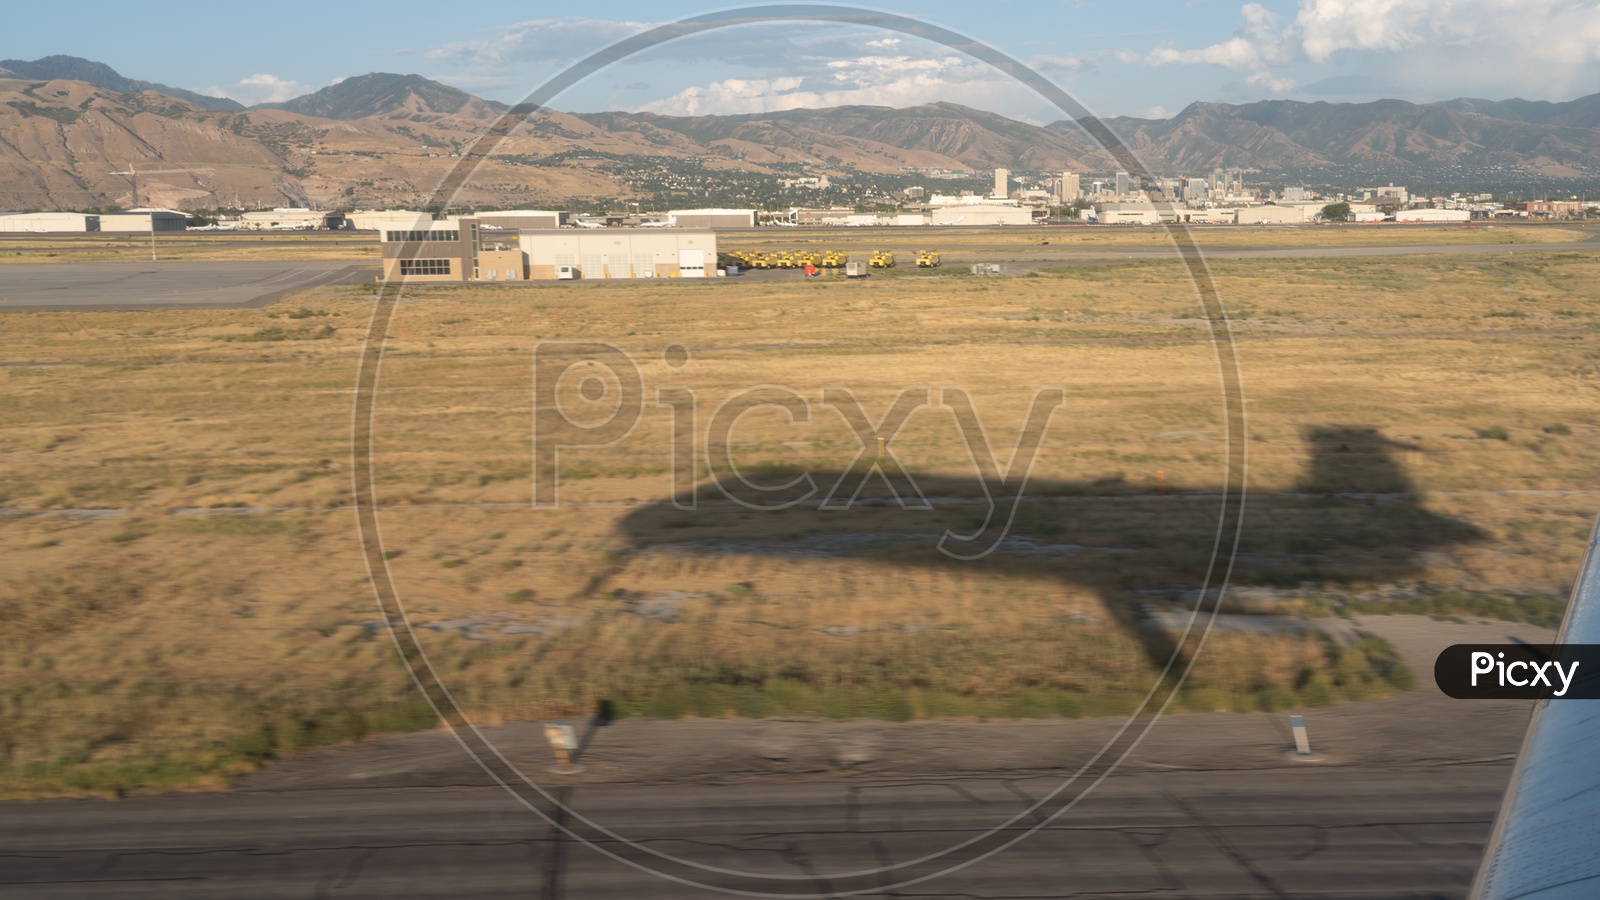 View of Shadow of Airplane against Wasatch Mountain Ranges, Salt Lake City, Utah